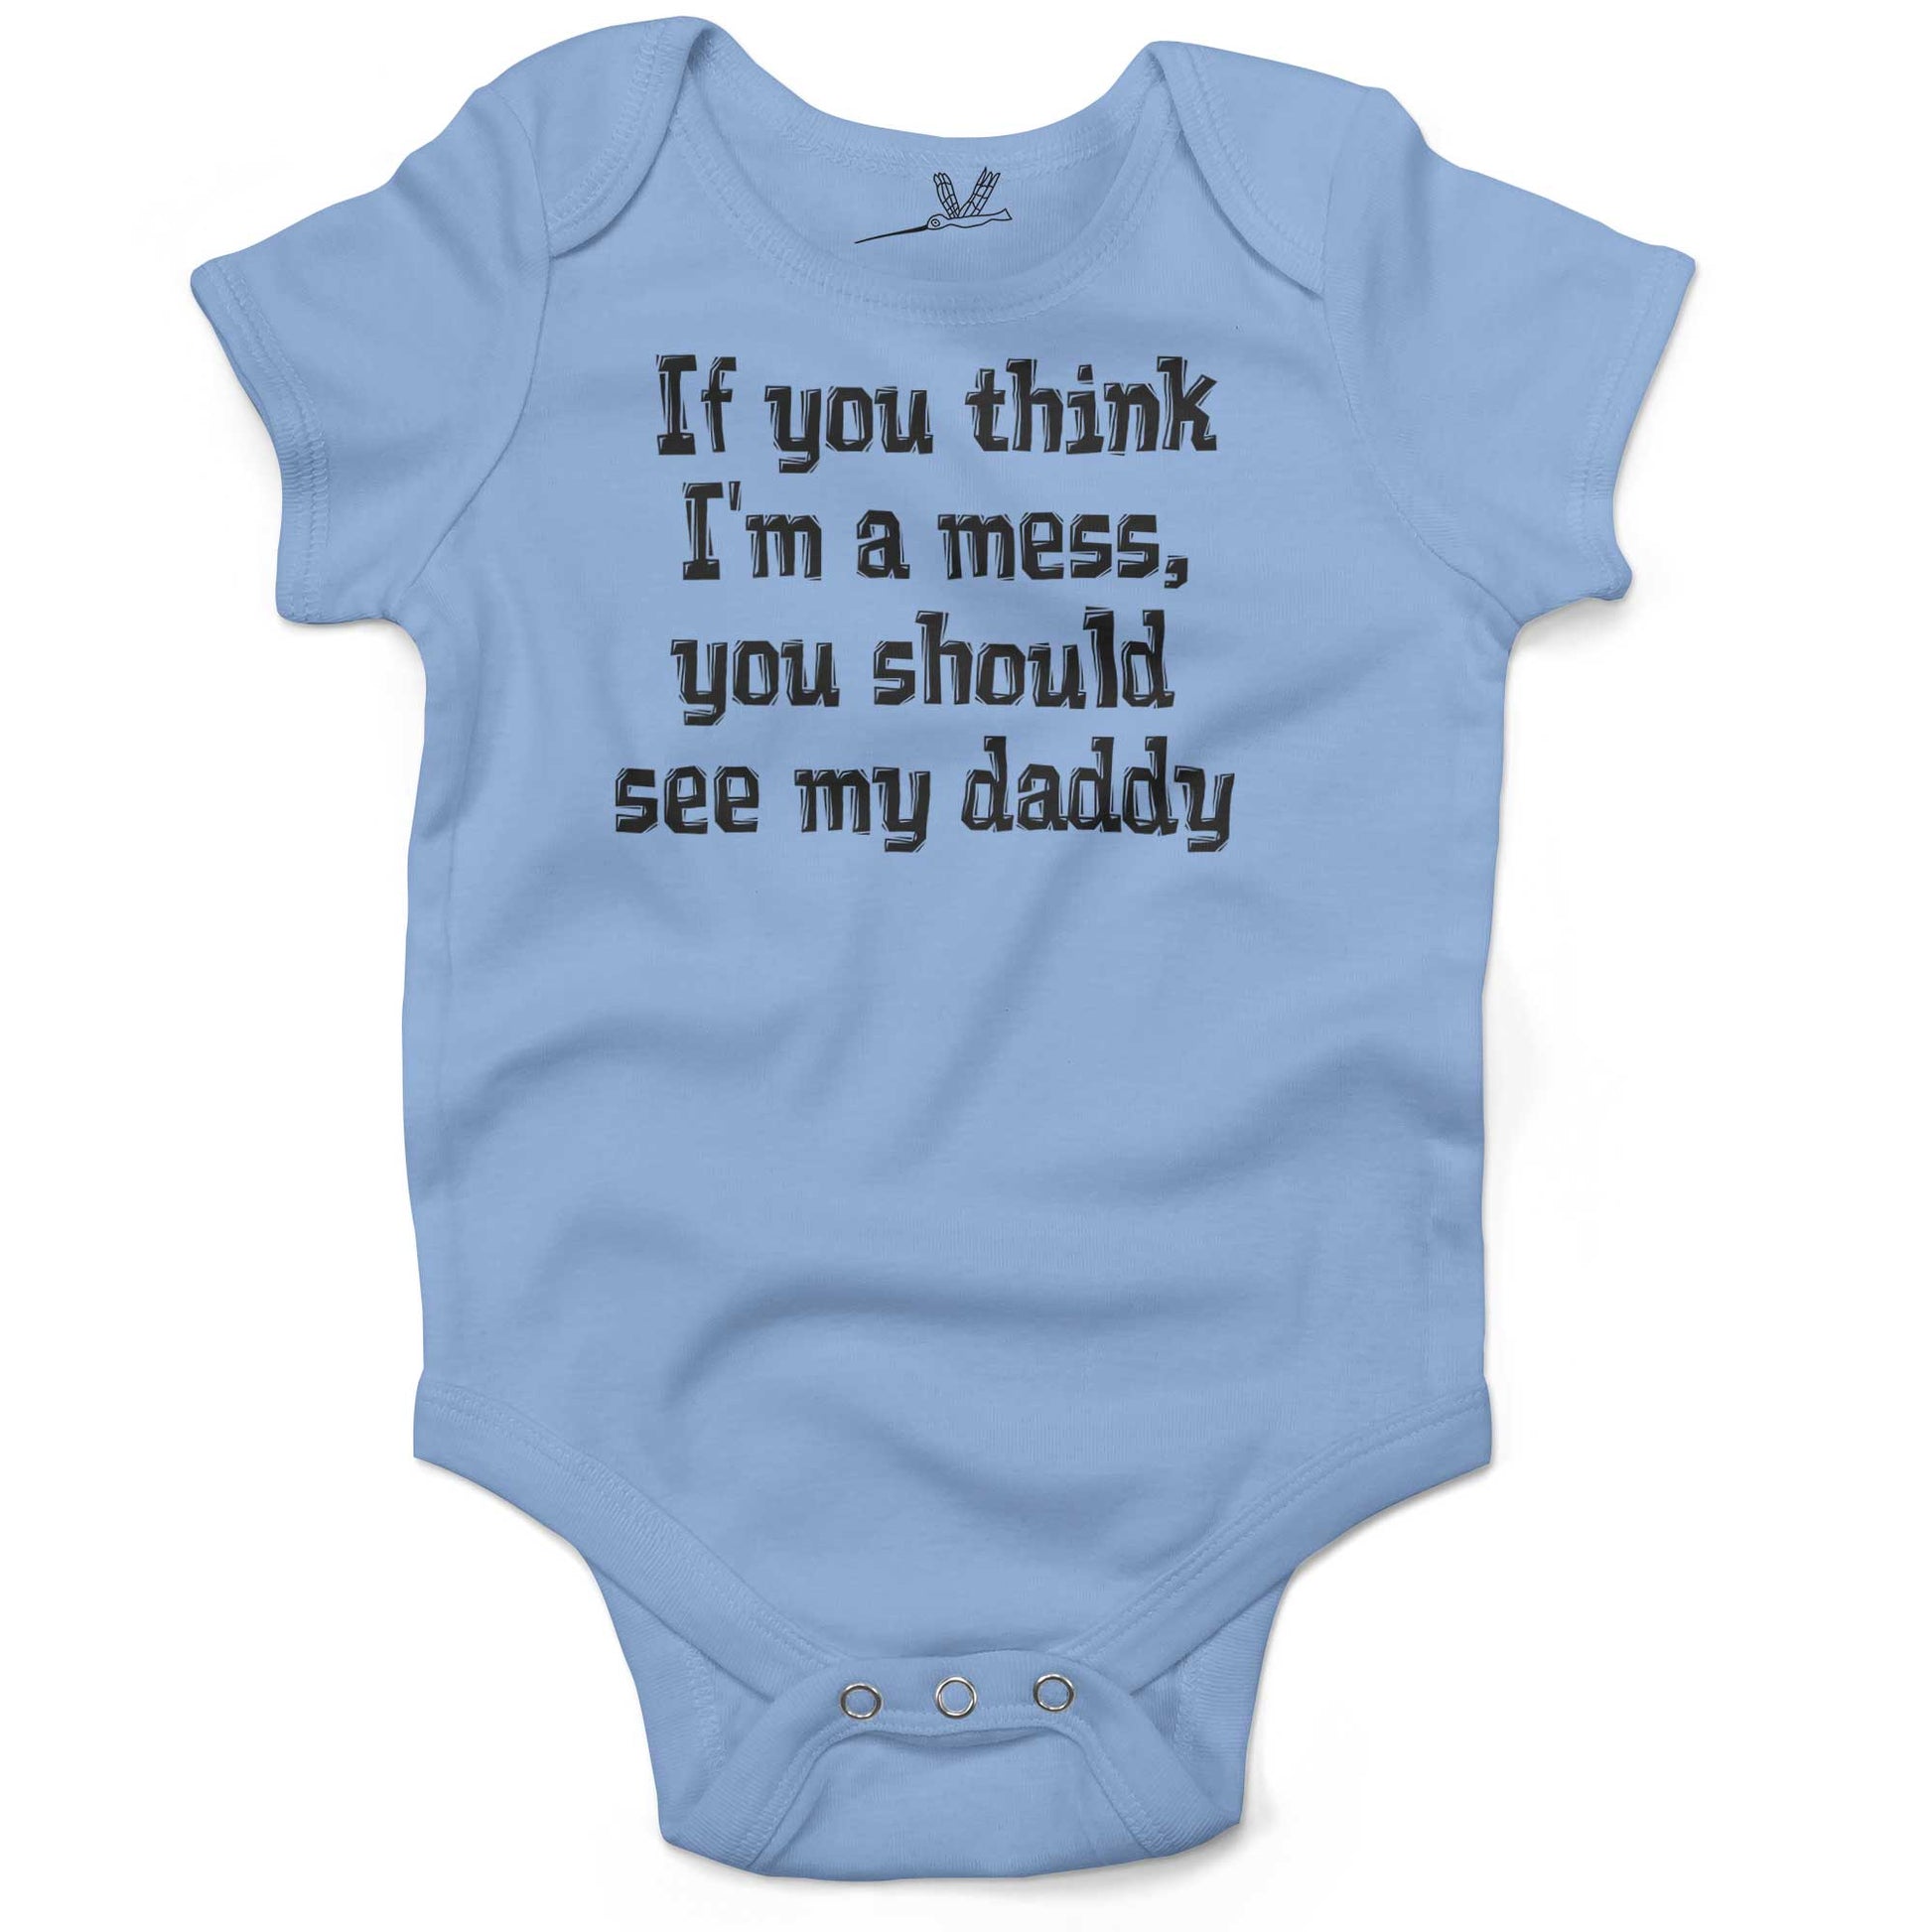 If You Think I'm A Mess, You Should See My Daddy Infant Bodysuit or Raglan Tee-Organic Baby Blue-3-6 months